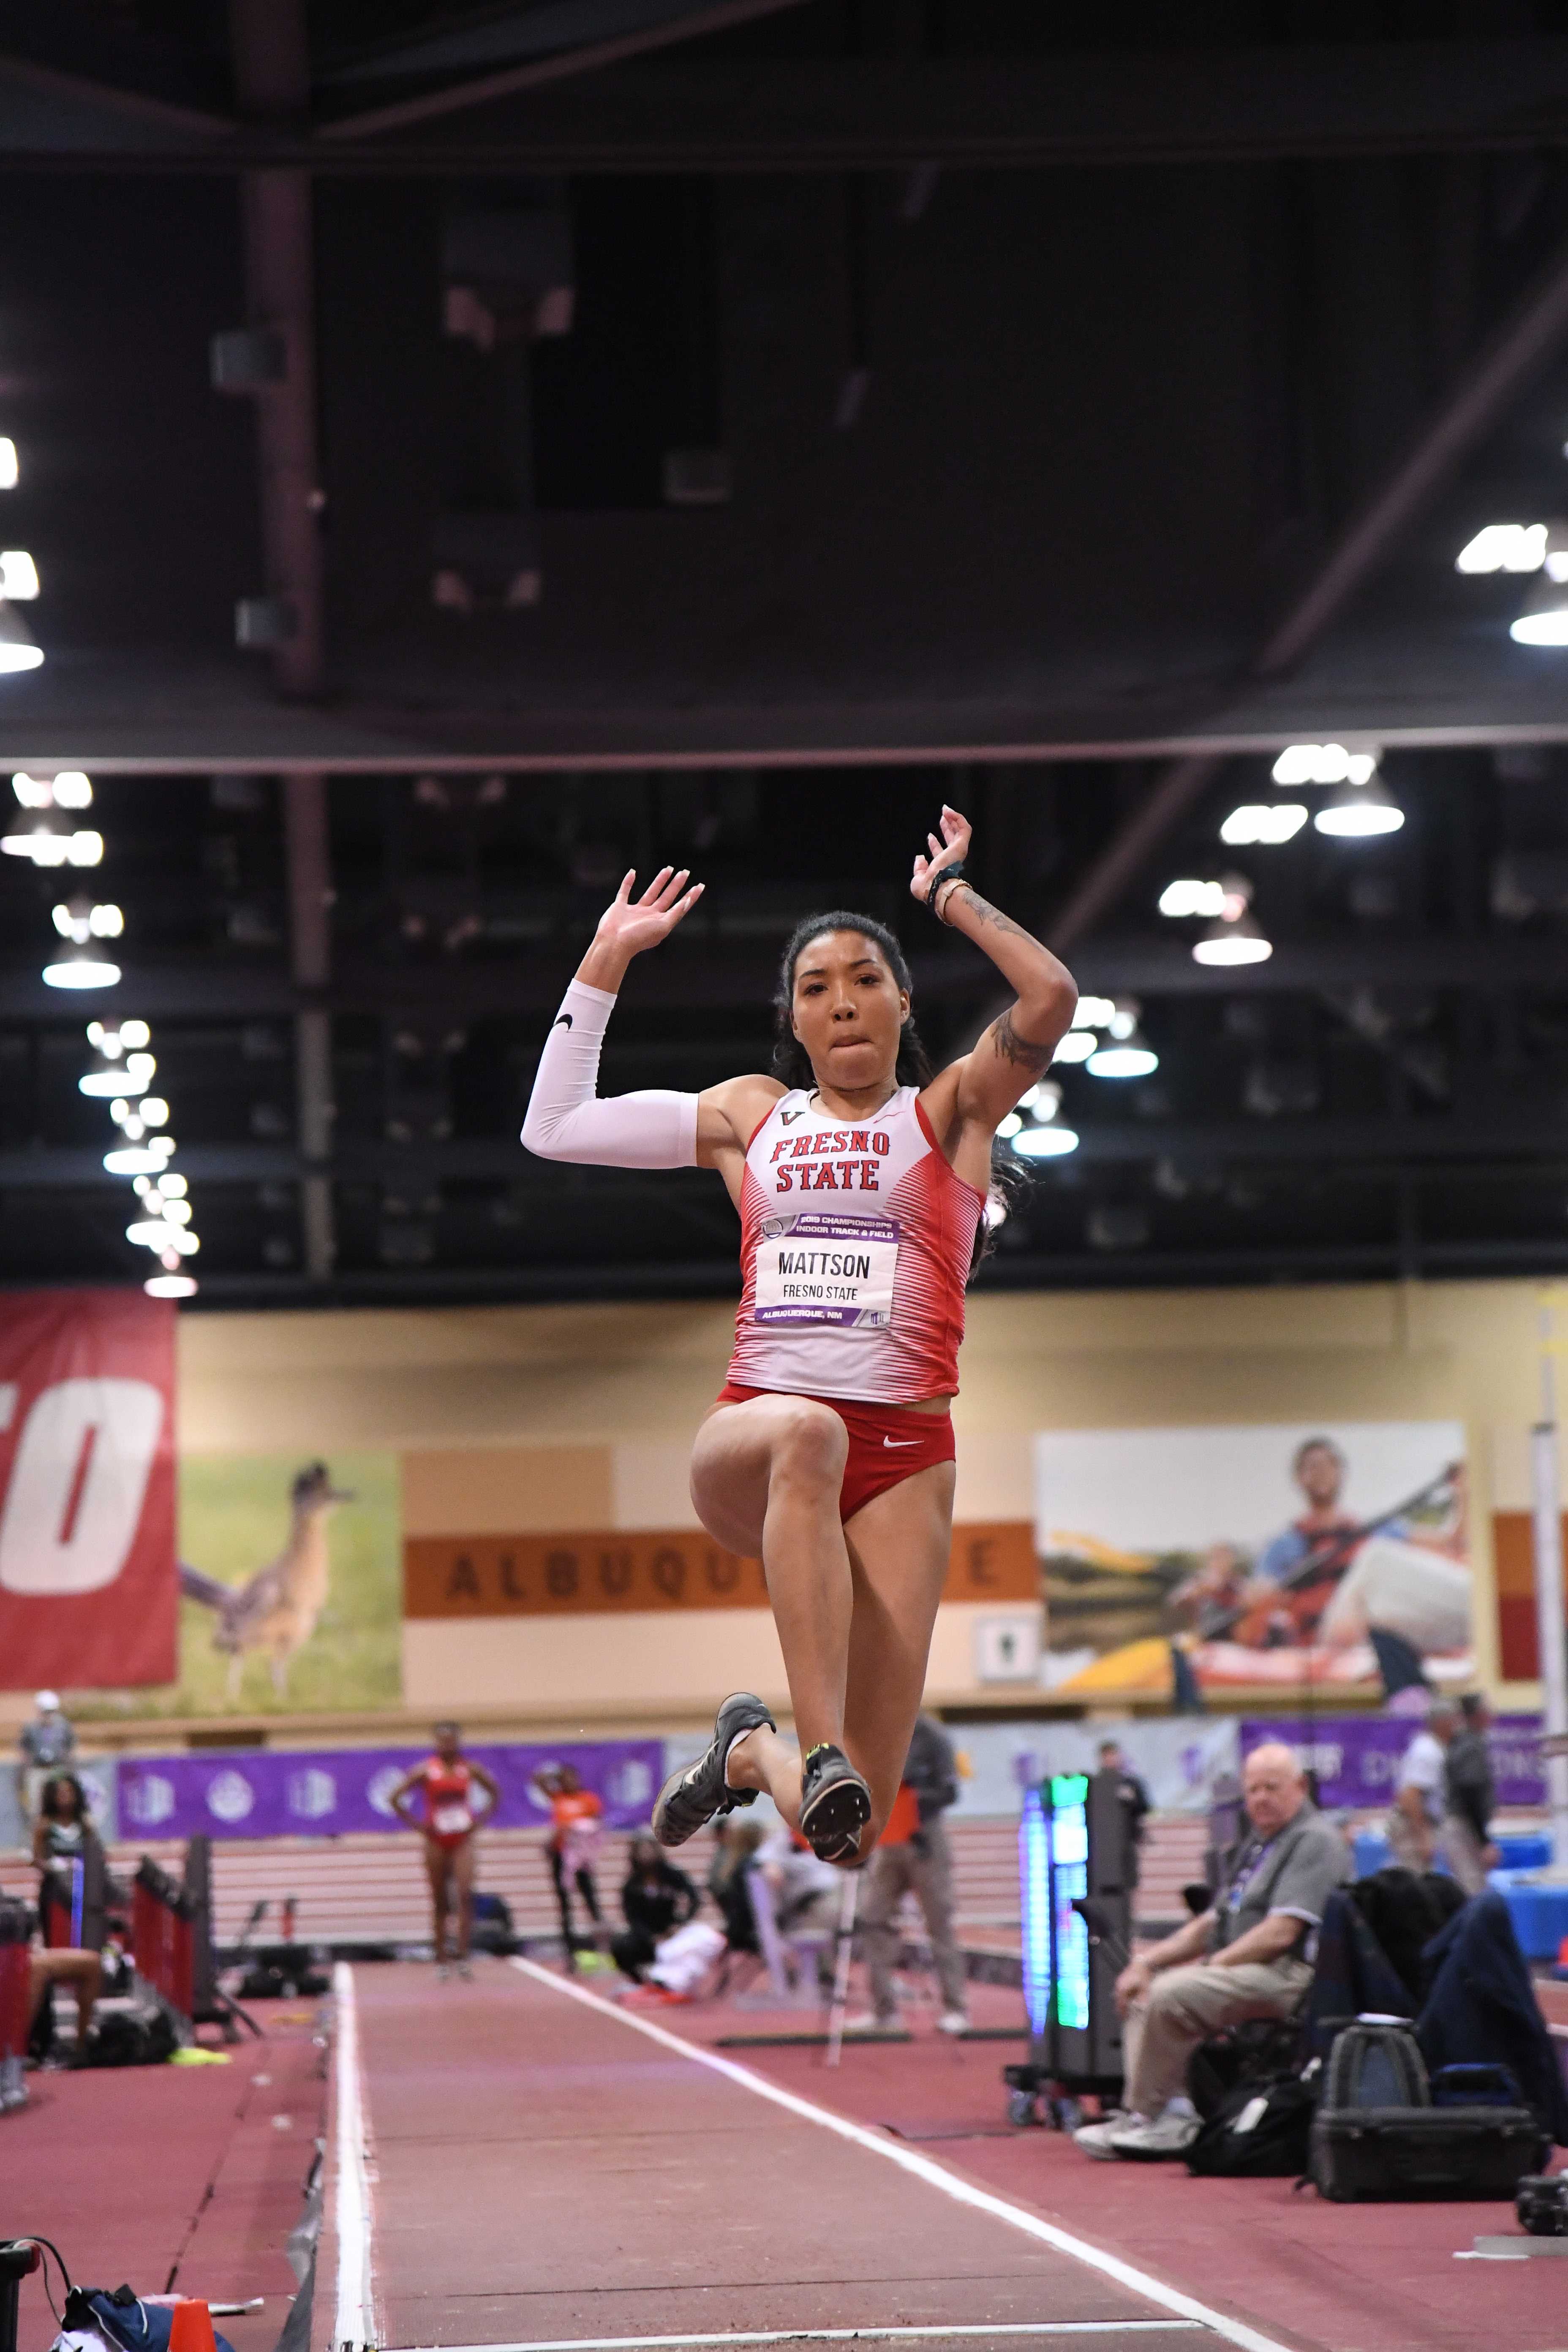 22 FEB 2019: The 2019 Mountain West Indoor Track and Field Championship takes place at the Albuquerque Convention Center in Albuquerque, NM. (Justin Tafoya/NCAA Photos)